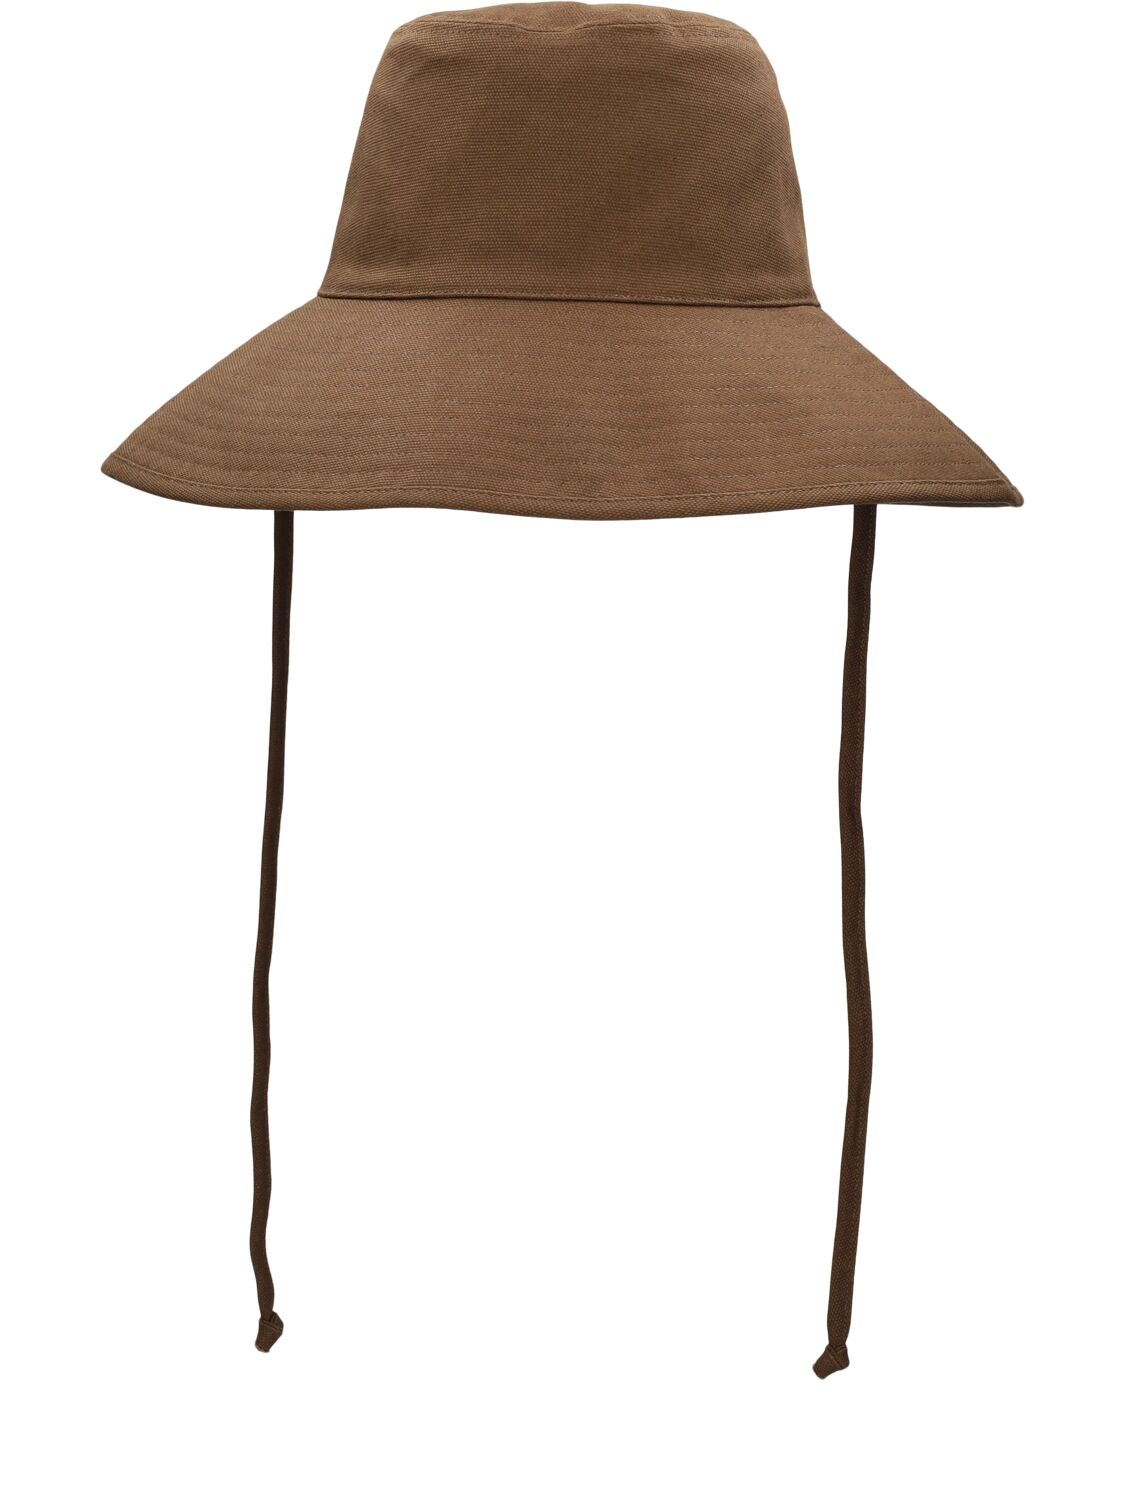 Lack Of Color Holiday Canvas Bucket Hat In Brown